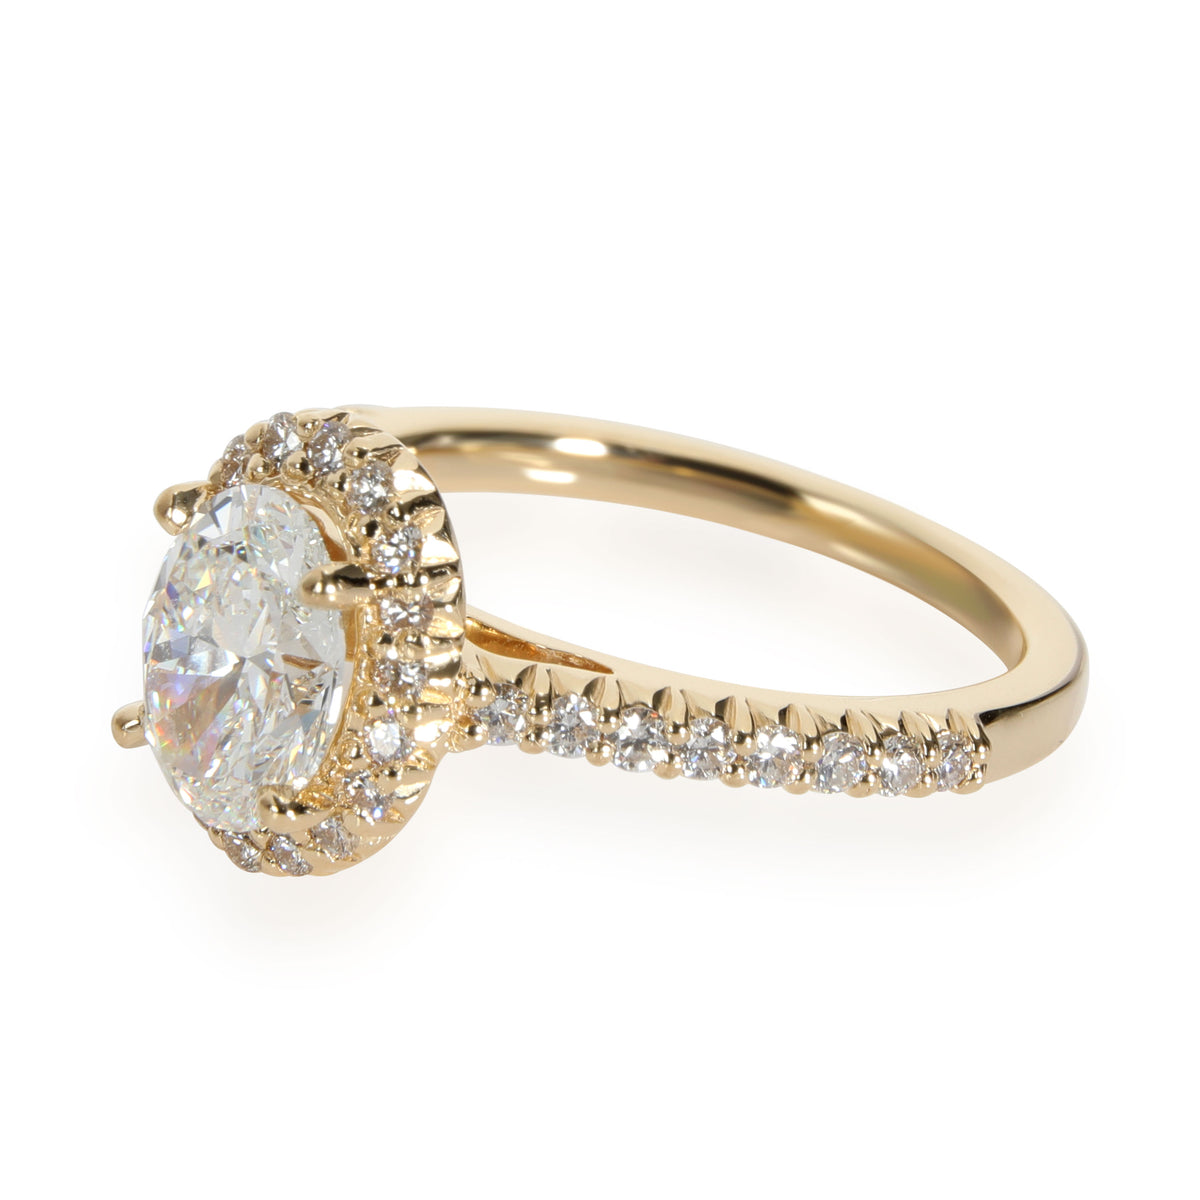 Ritani Halo Oval Diamond Engagement Ring in 18K Yellow Gold GIA D IF 1.55 CTW